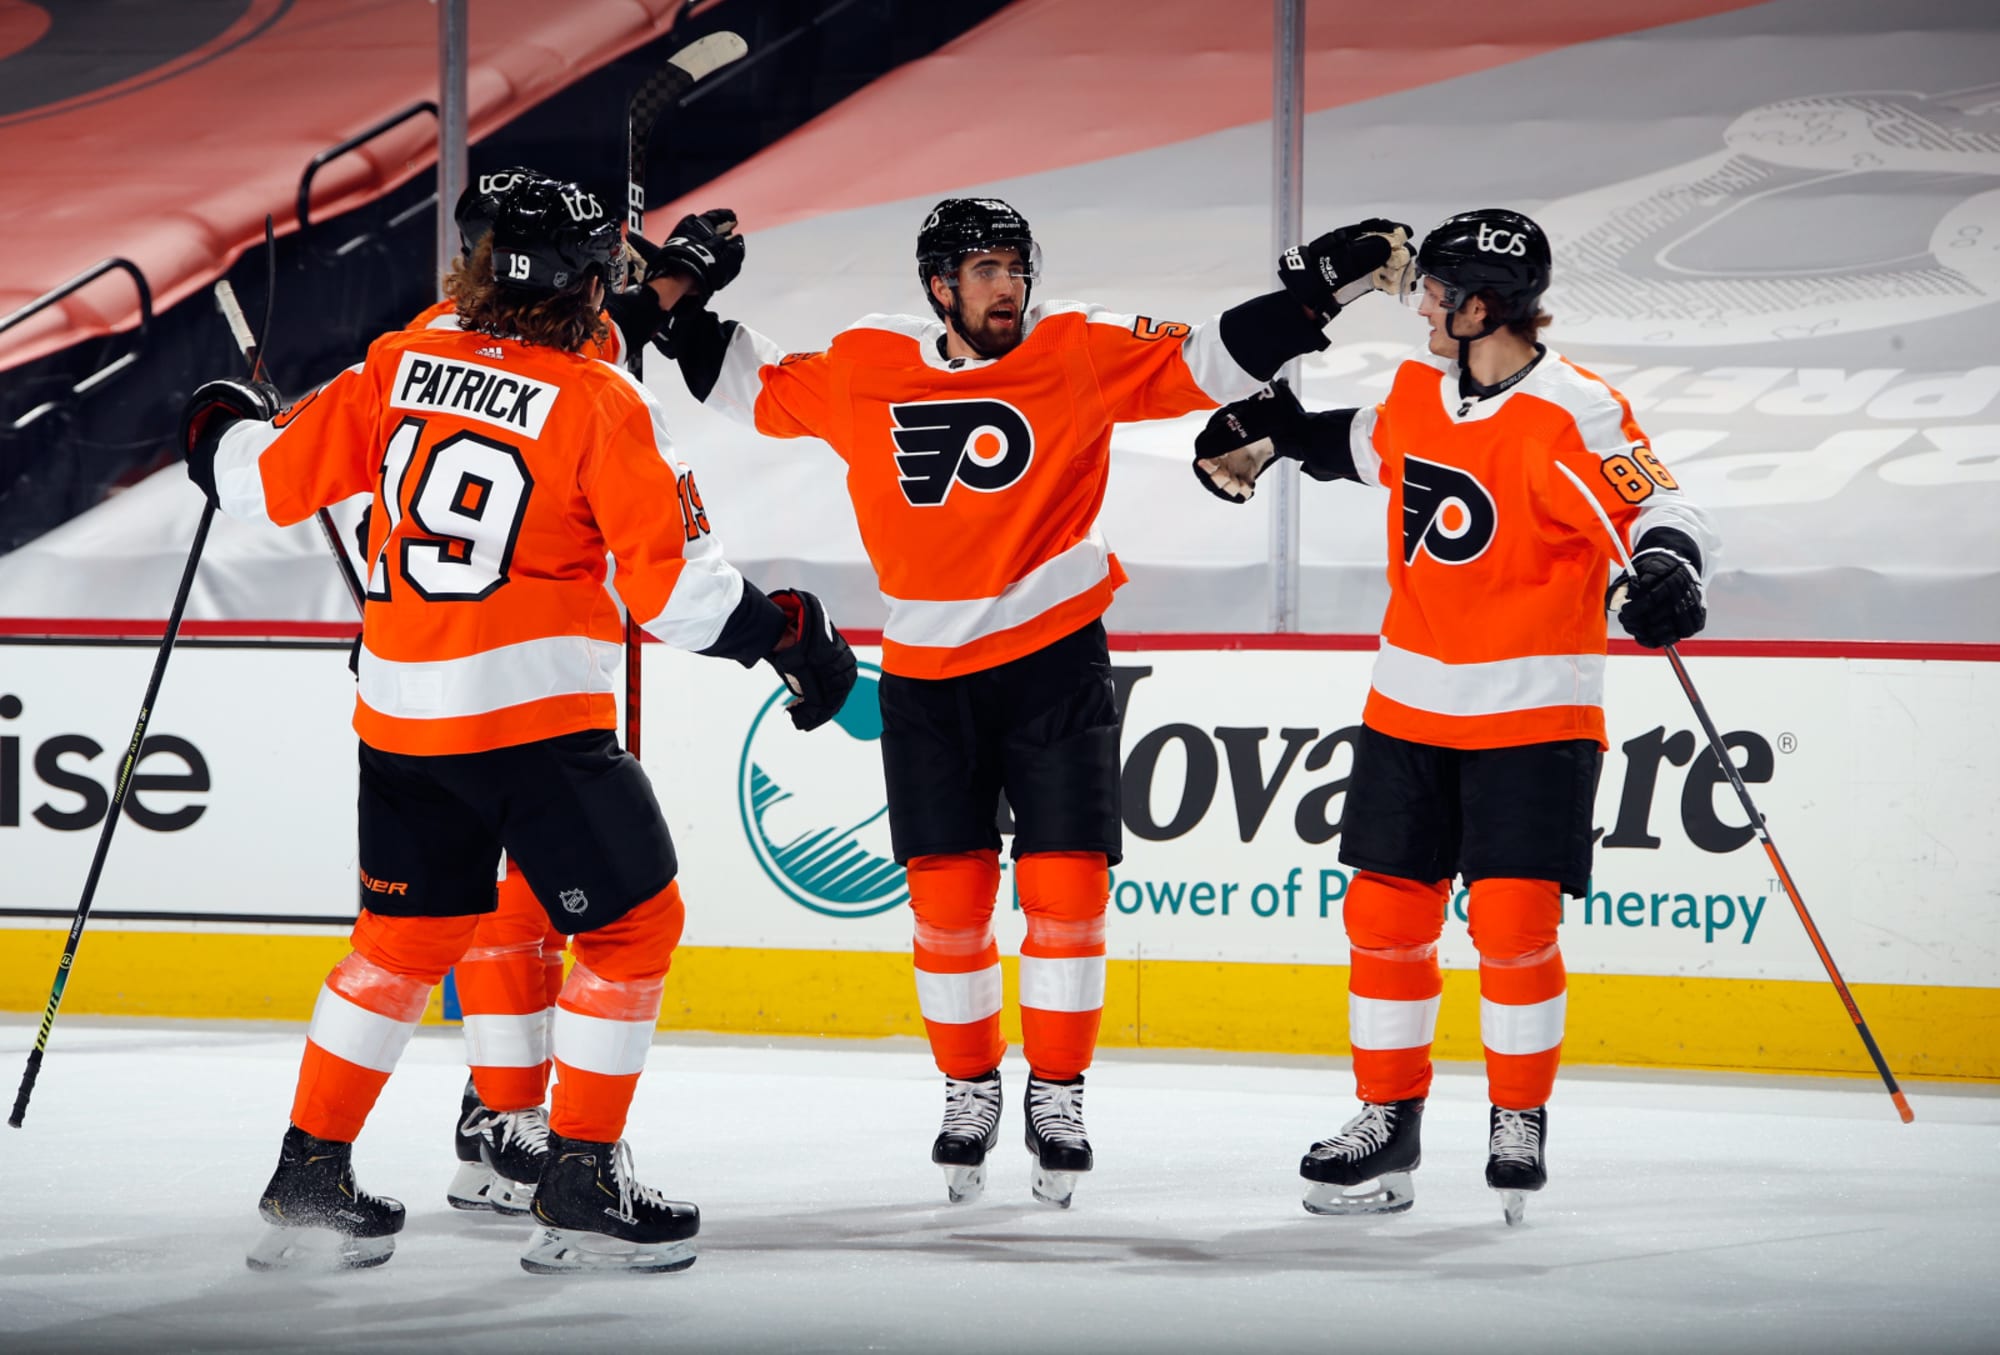 Philadelphia Flyers Roster Comparing the 99' and 21' Rosters